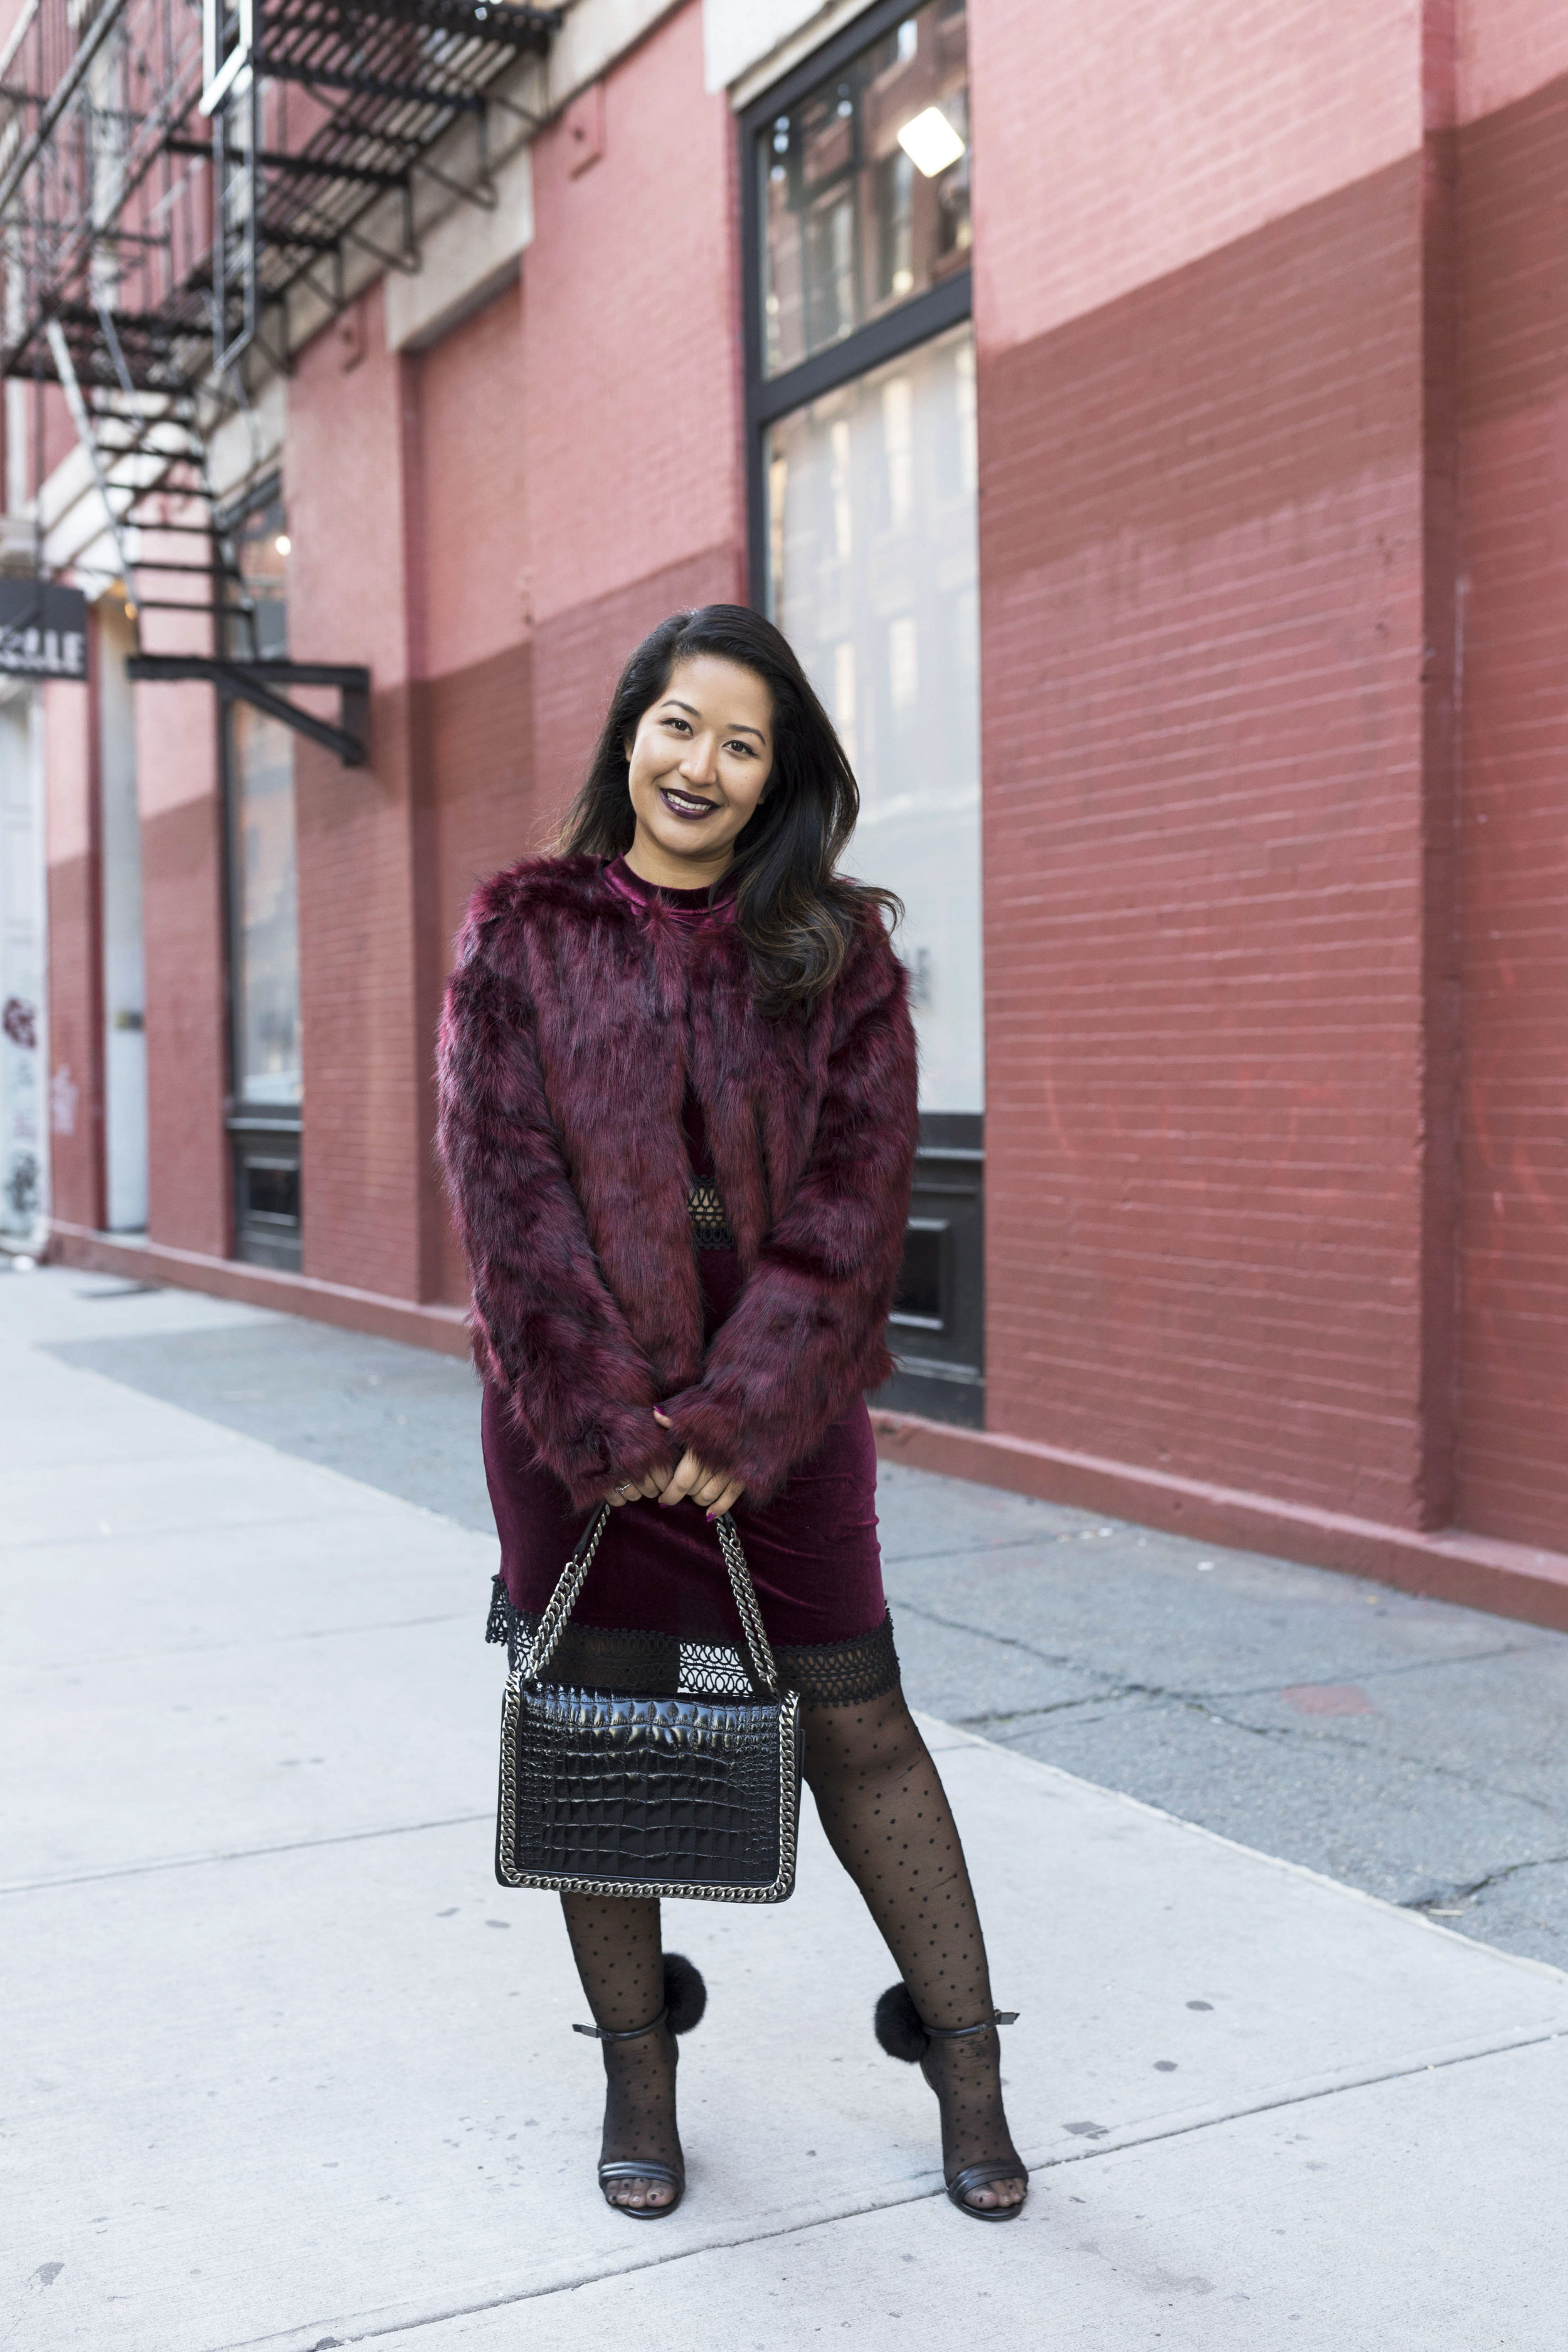 Krity S x Holiday Outfit x Century 21 Burgundy Velvet Dress and Faux Fur1.jpg